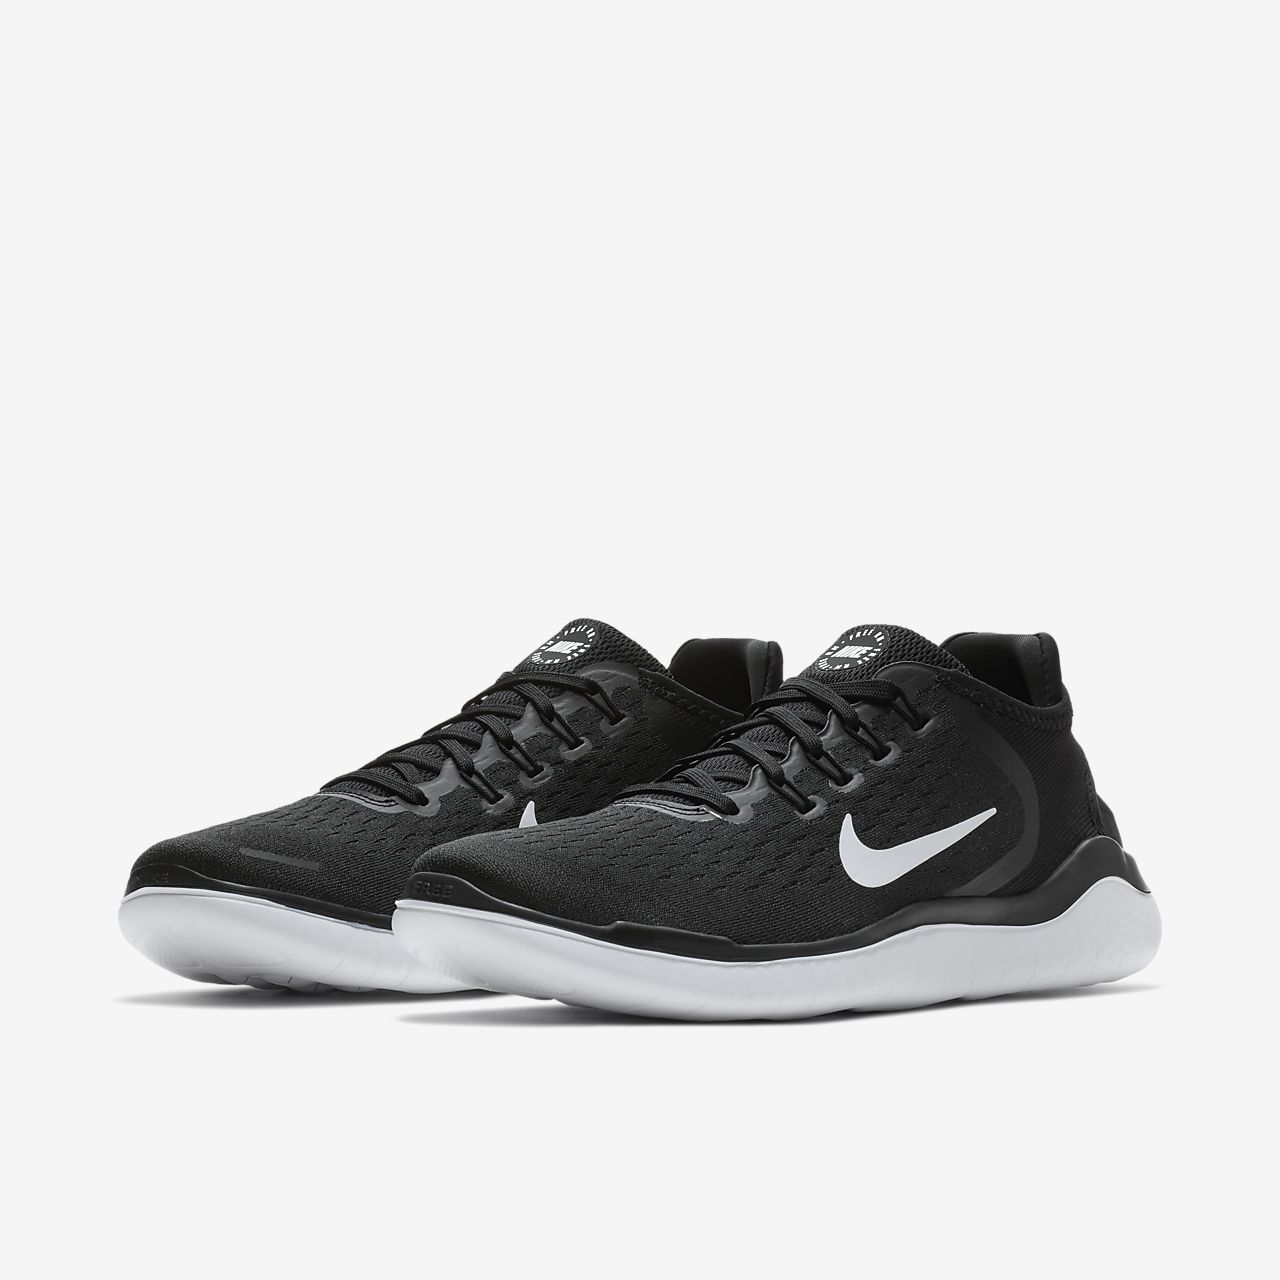 Nike sneakers for men – With best in 